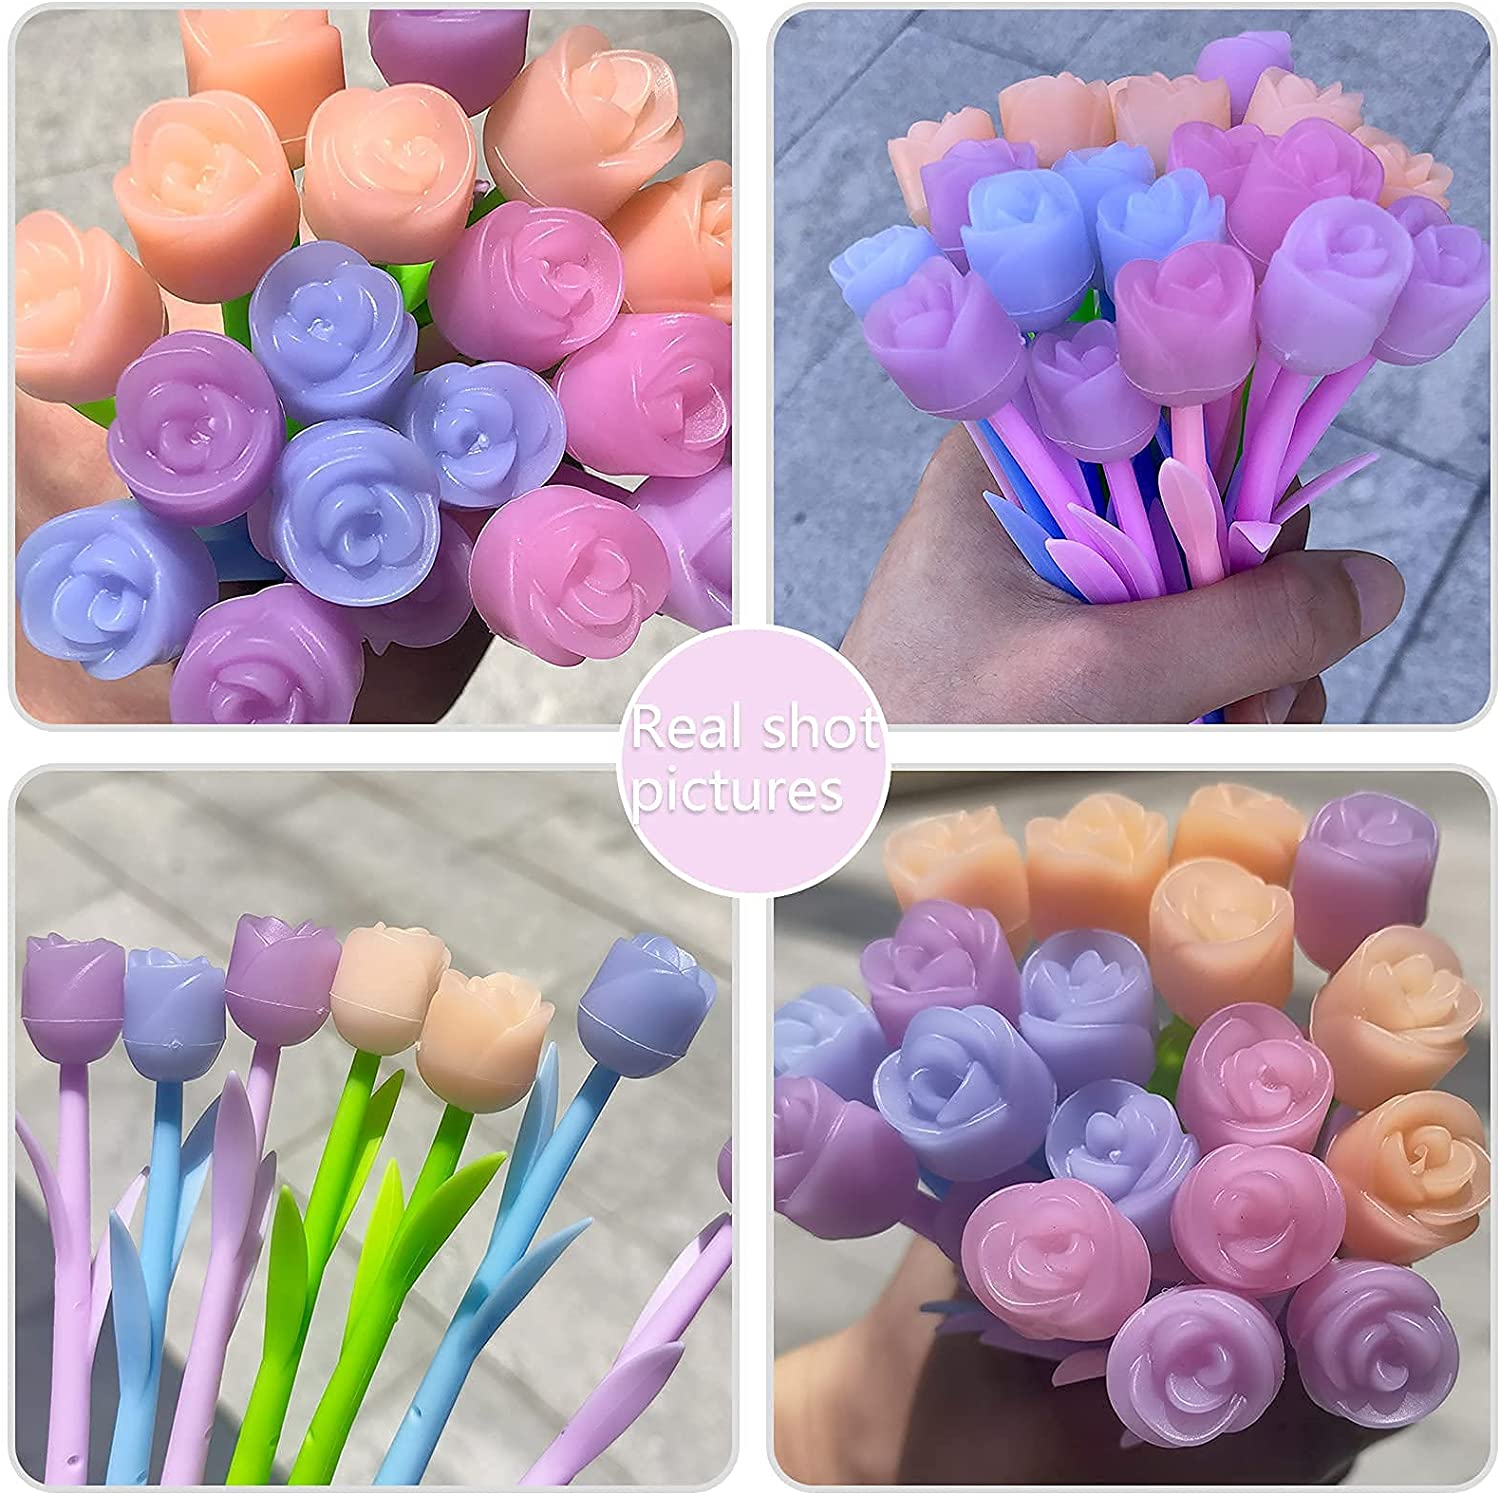 Rush 24PCS Color Changing Flower Pens, Ballpoint Pens Creative Gel Ink Rollerball Pens Fun Pens, Colorful Flower Pen for School Home Office S001 - image 2 of 5